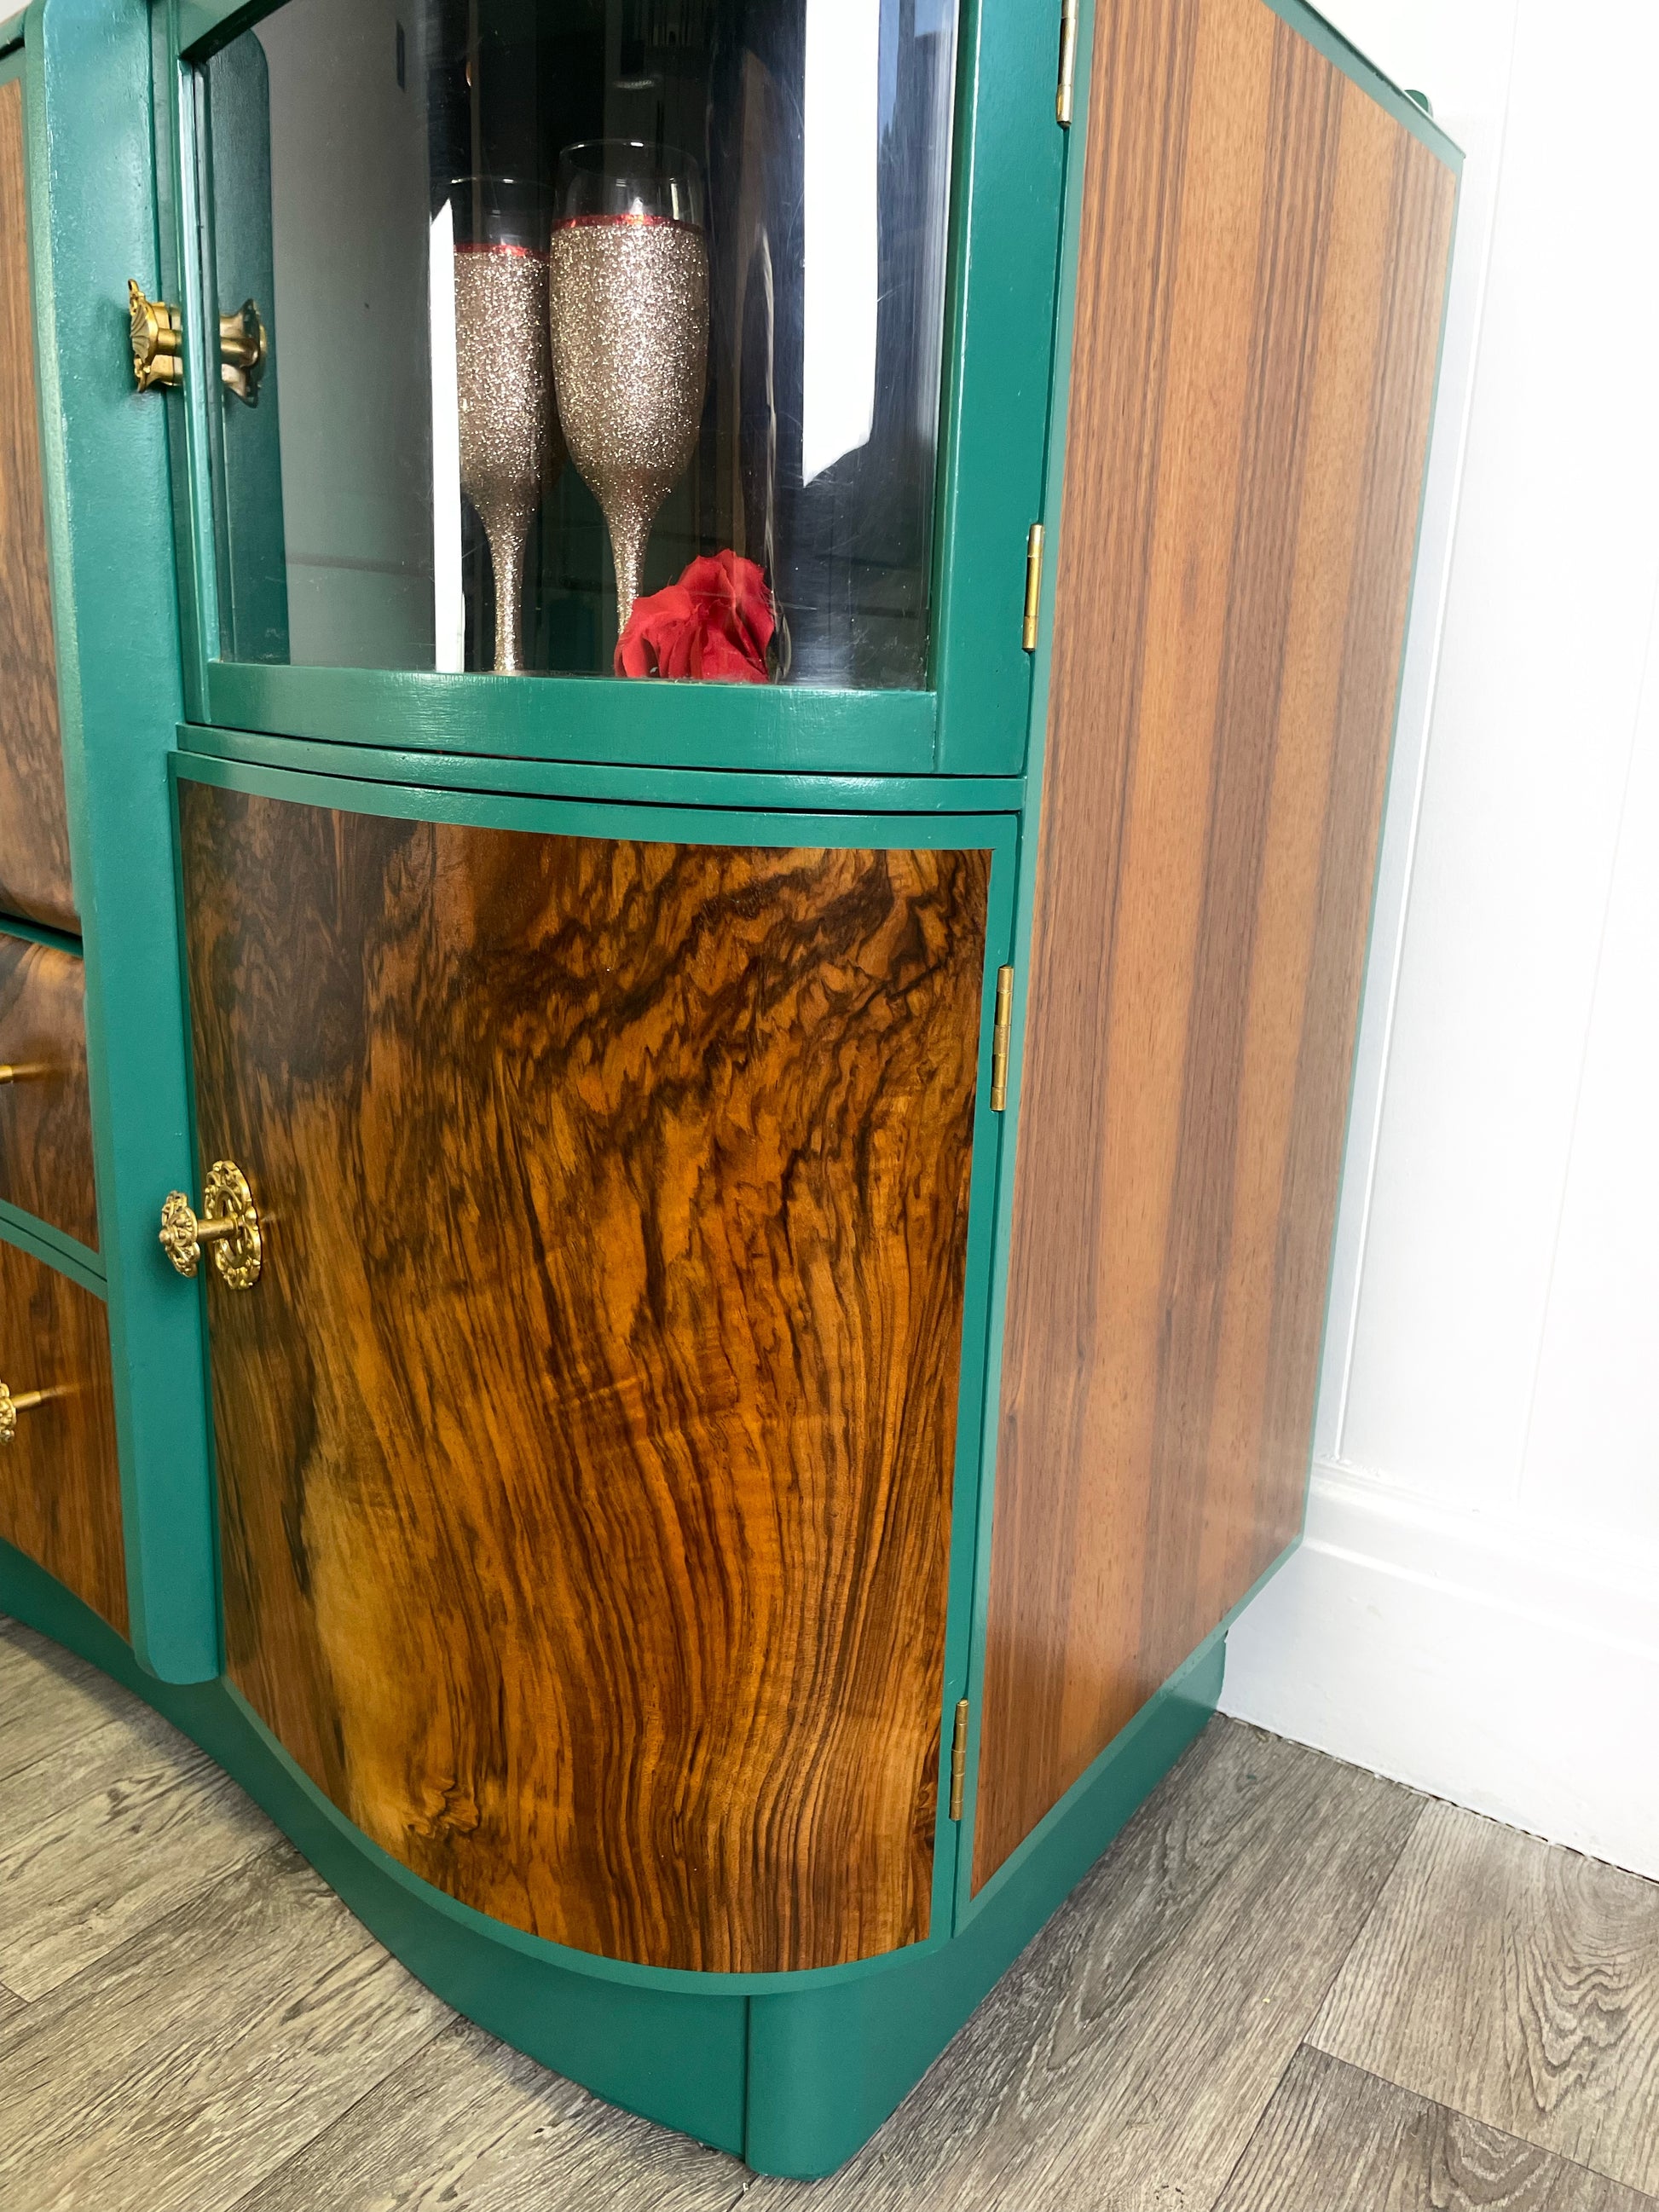 Beautility Walnut Cocktail Cabinet, Green Drinks Bar, Vintage Drinks Cabinet - Unique Home Pieces